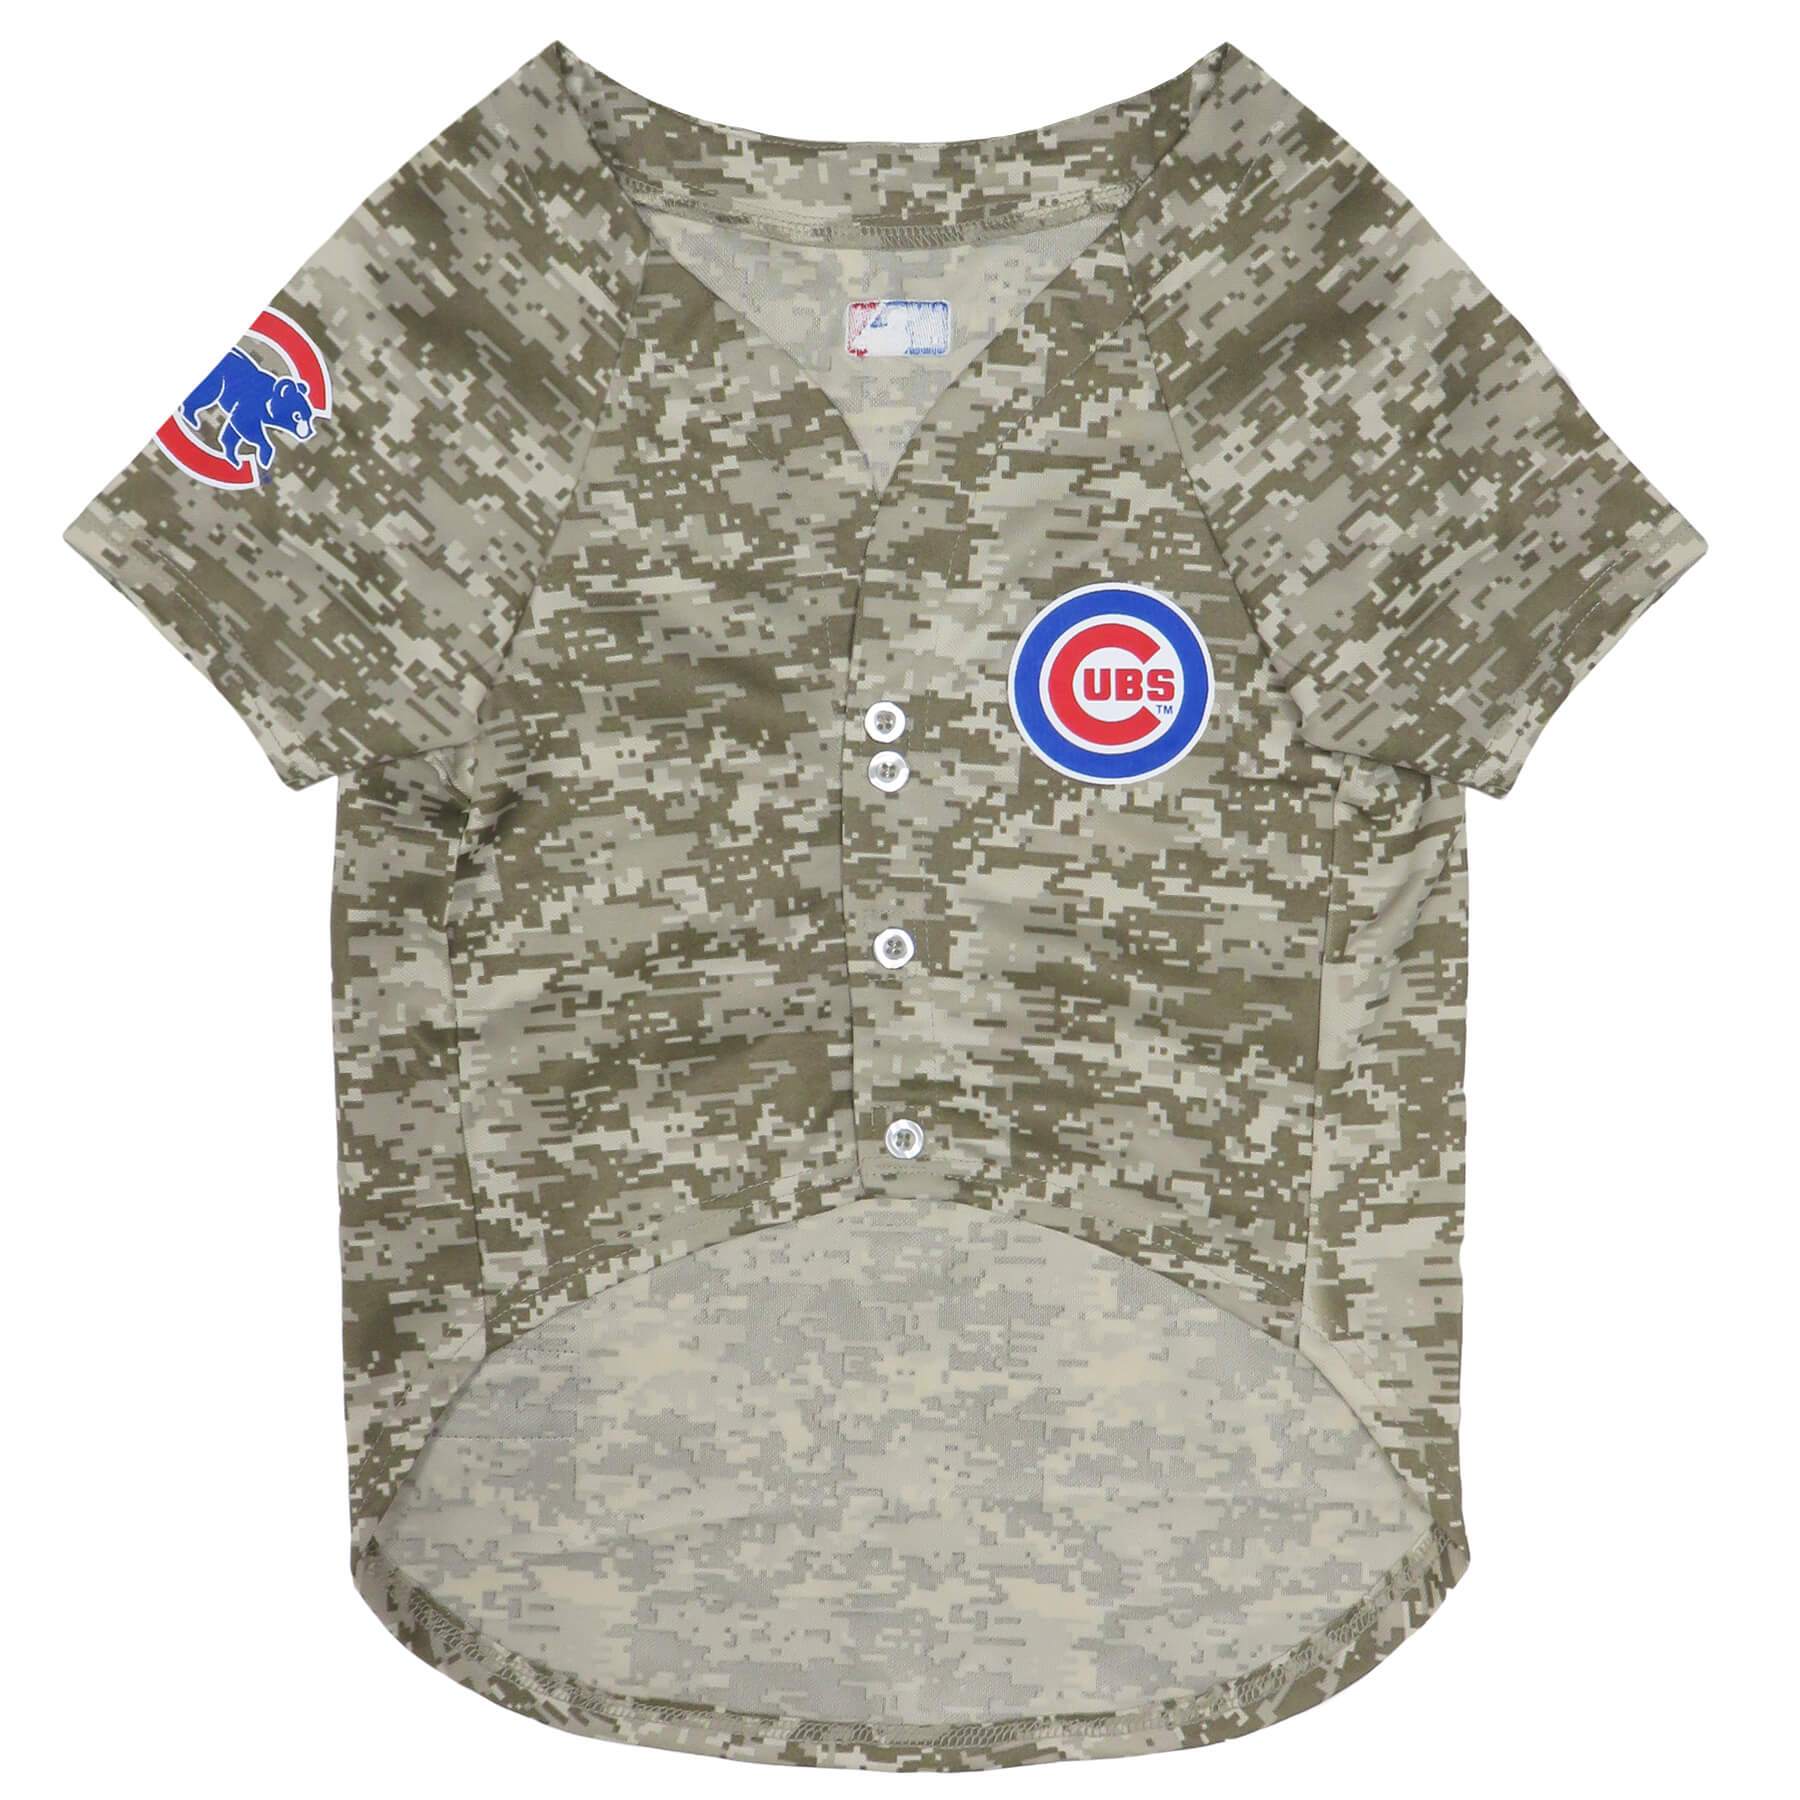 cubs jersey champs